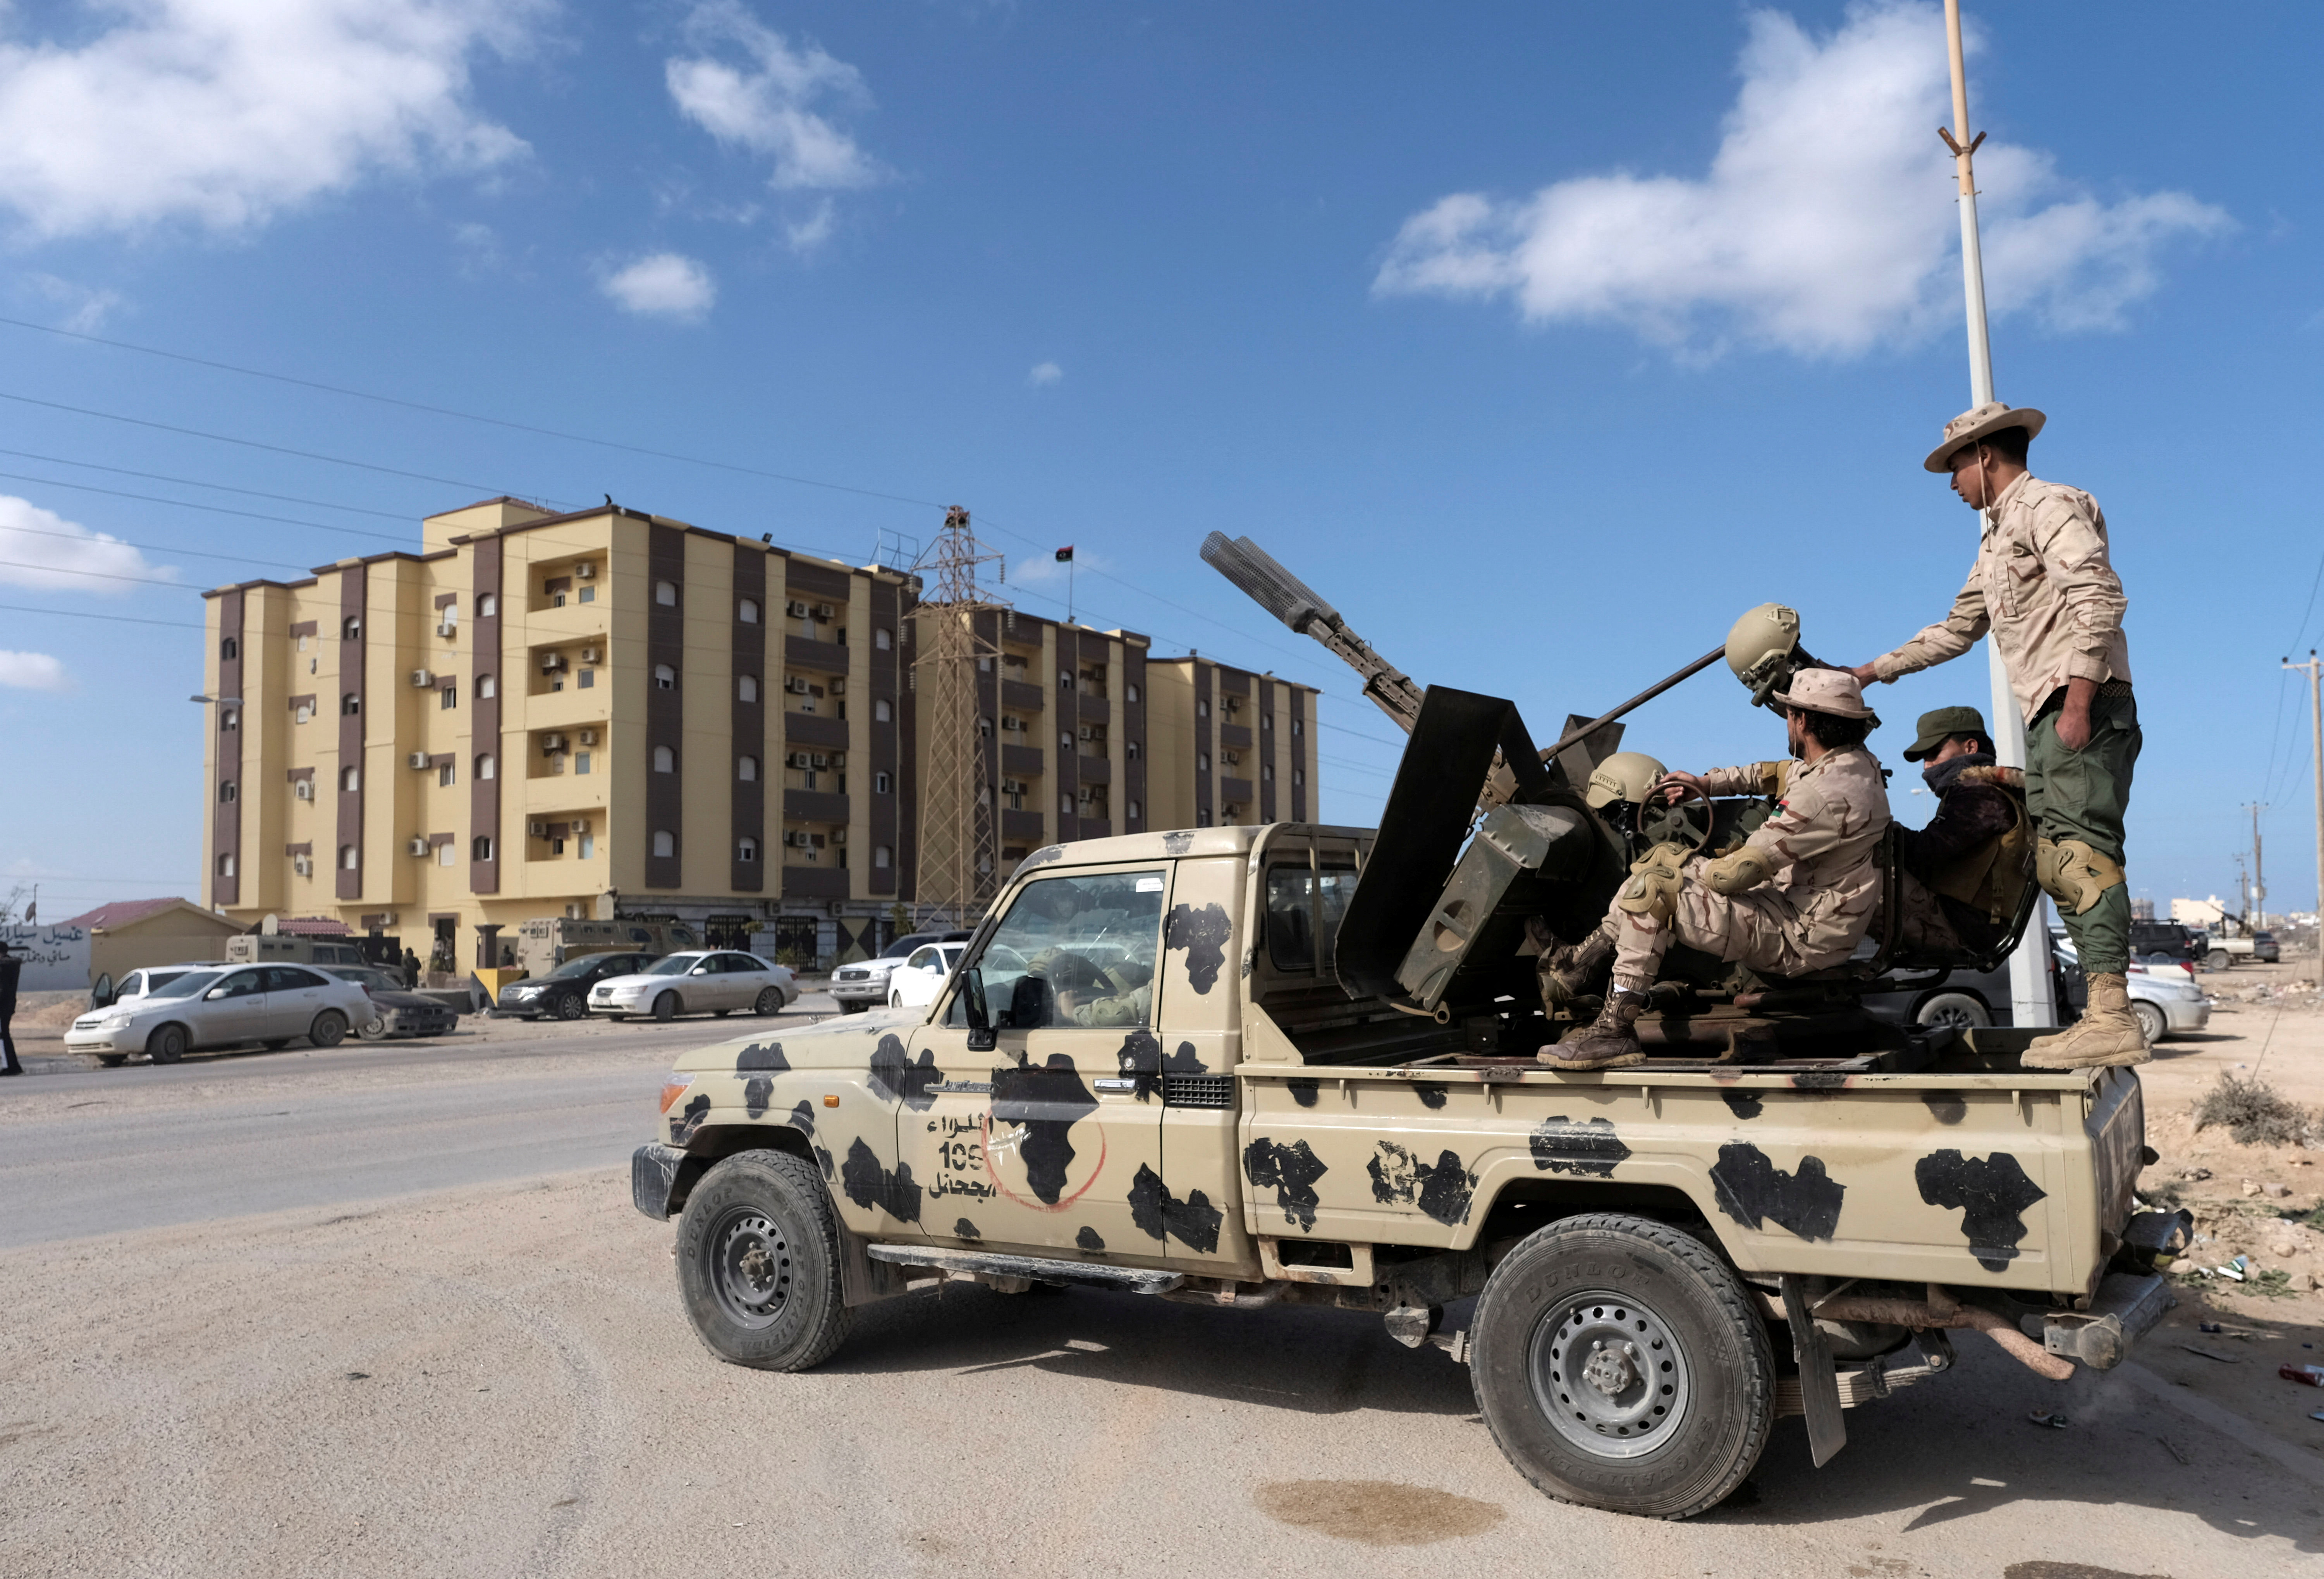 Security forces stand guard outside the Parliament building in Tobruk, Libya